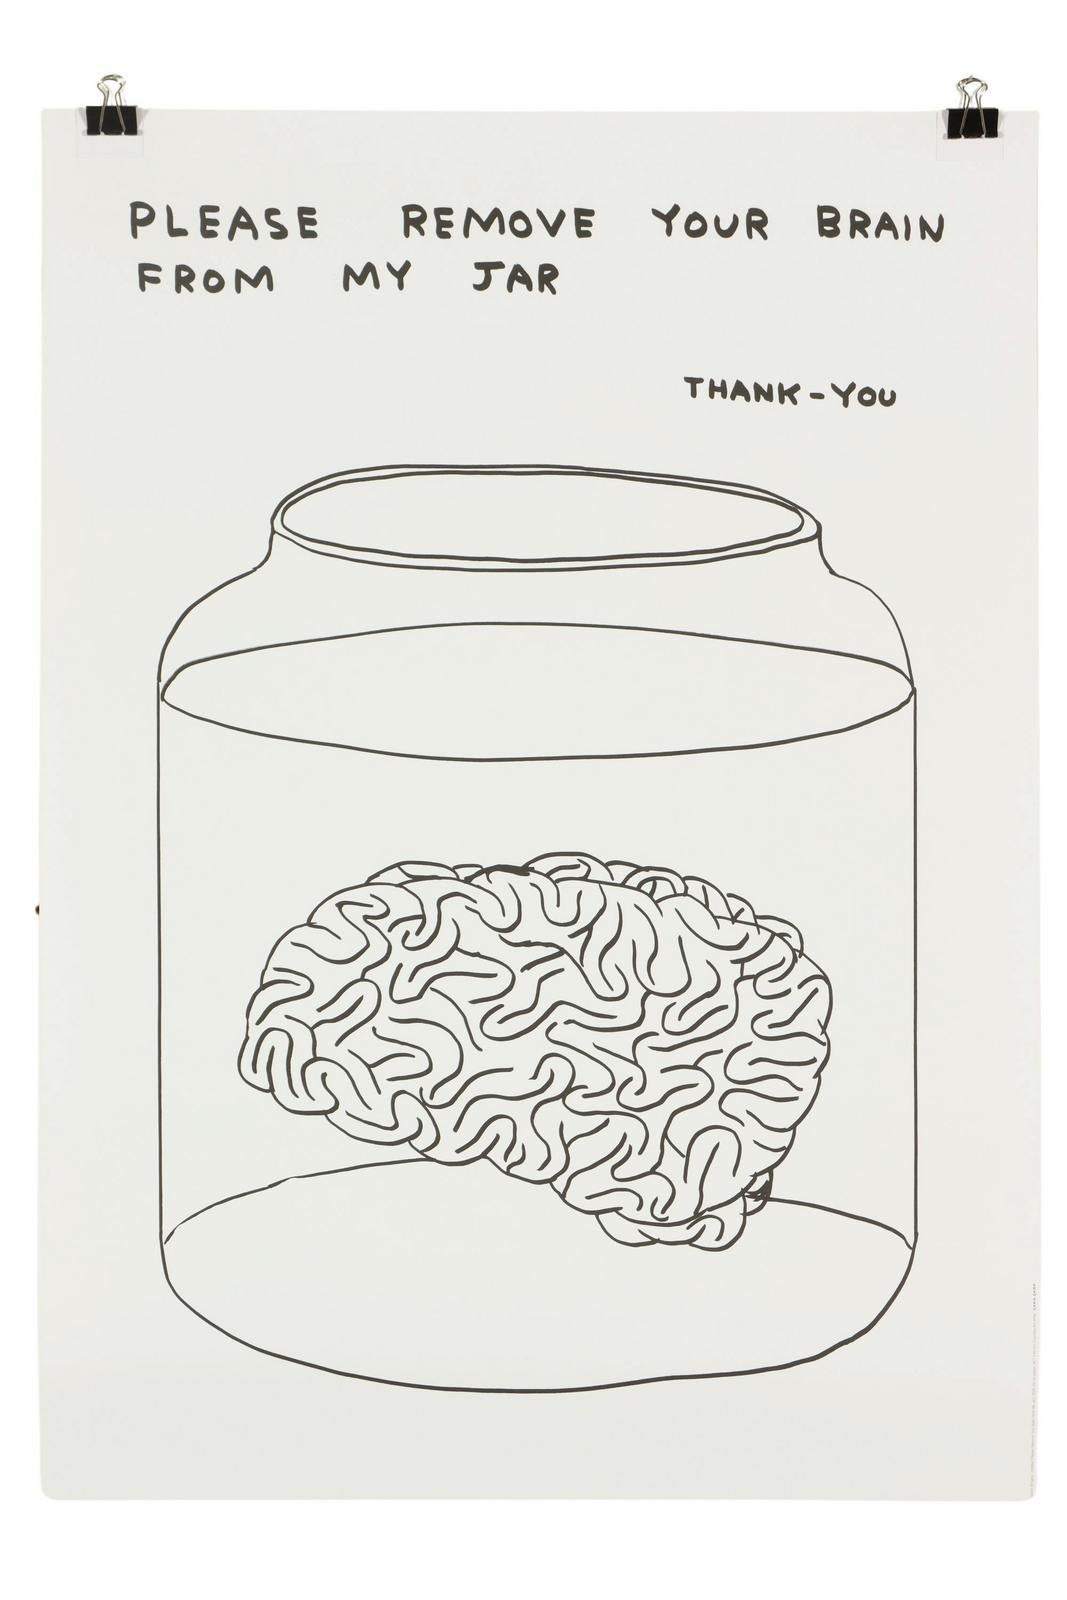 David Shrigley -- Please Remove Your Brain From My Jar, 2023
70 x 50 cm
It is created from the unique work: Untitled (Please Remove Your Brain From My Jar) (2020)
Printed on 200g Munken Lynx paper
Printed by Narayana Press in Denmark
Unnumbered from